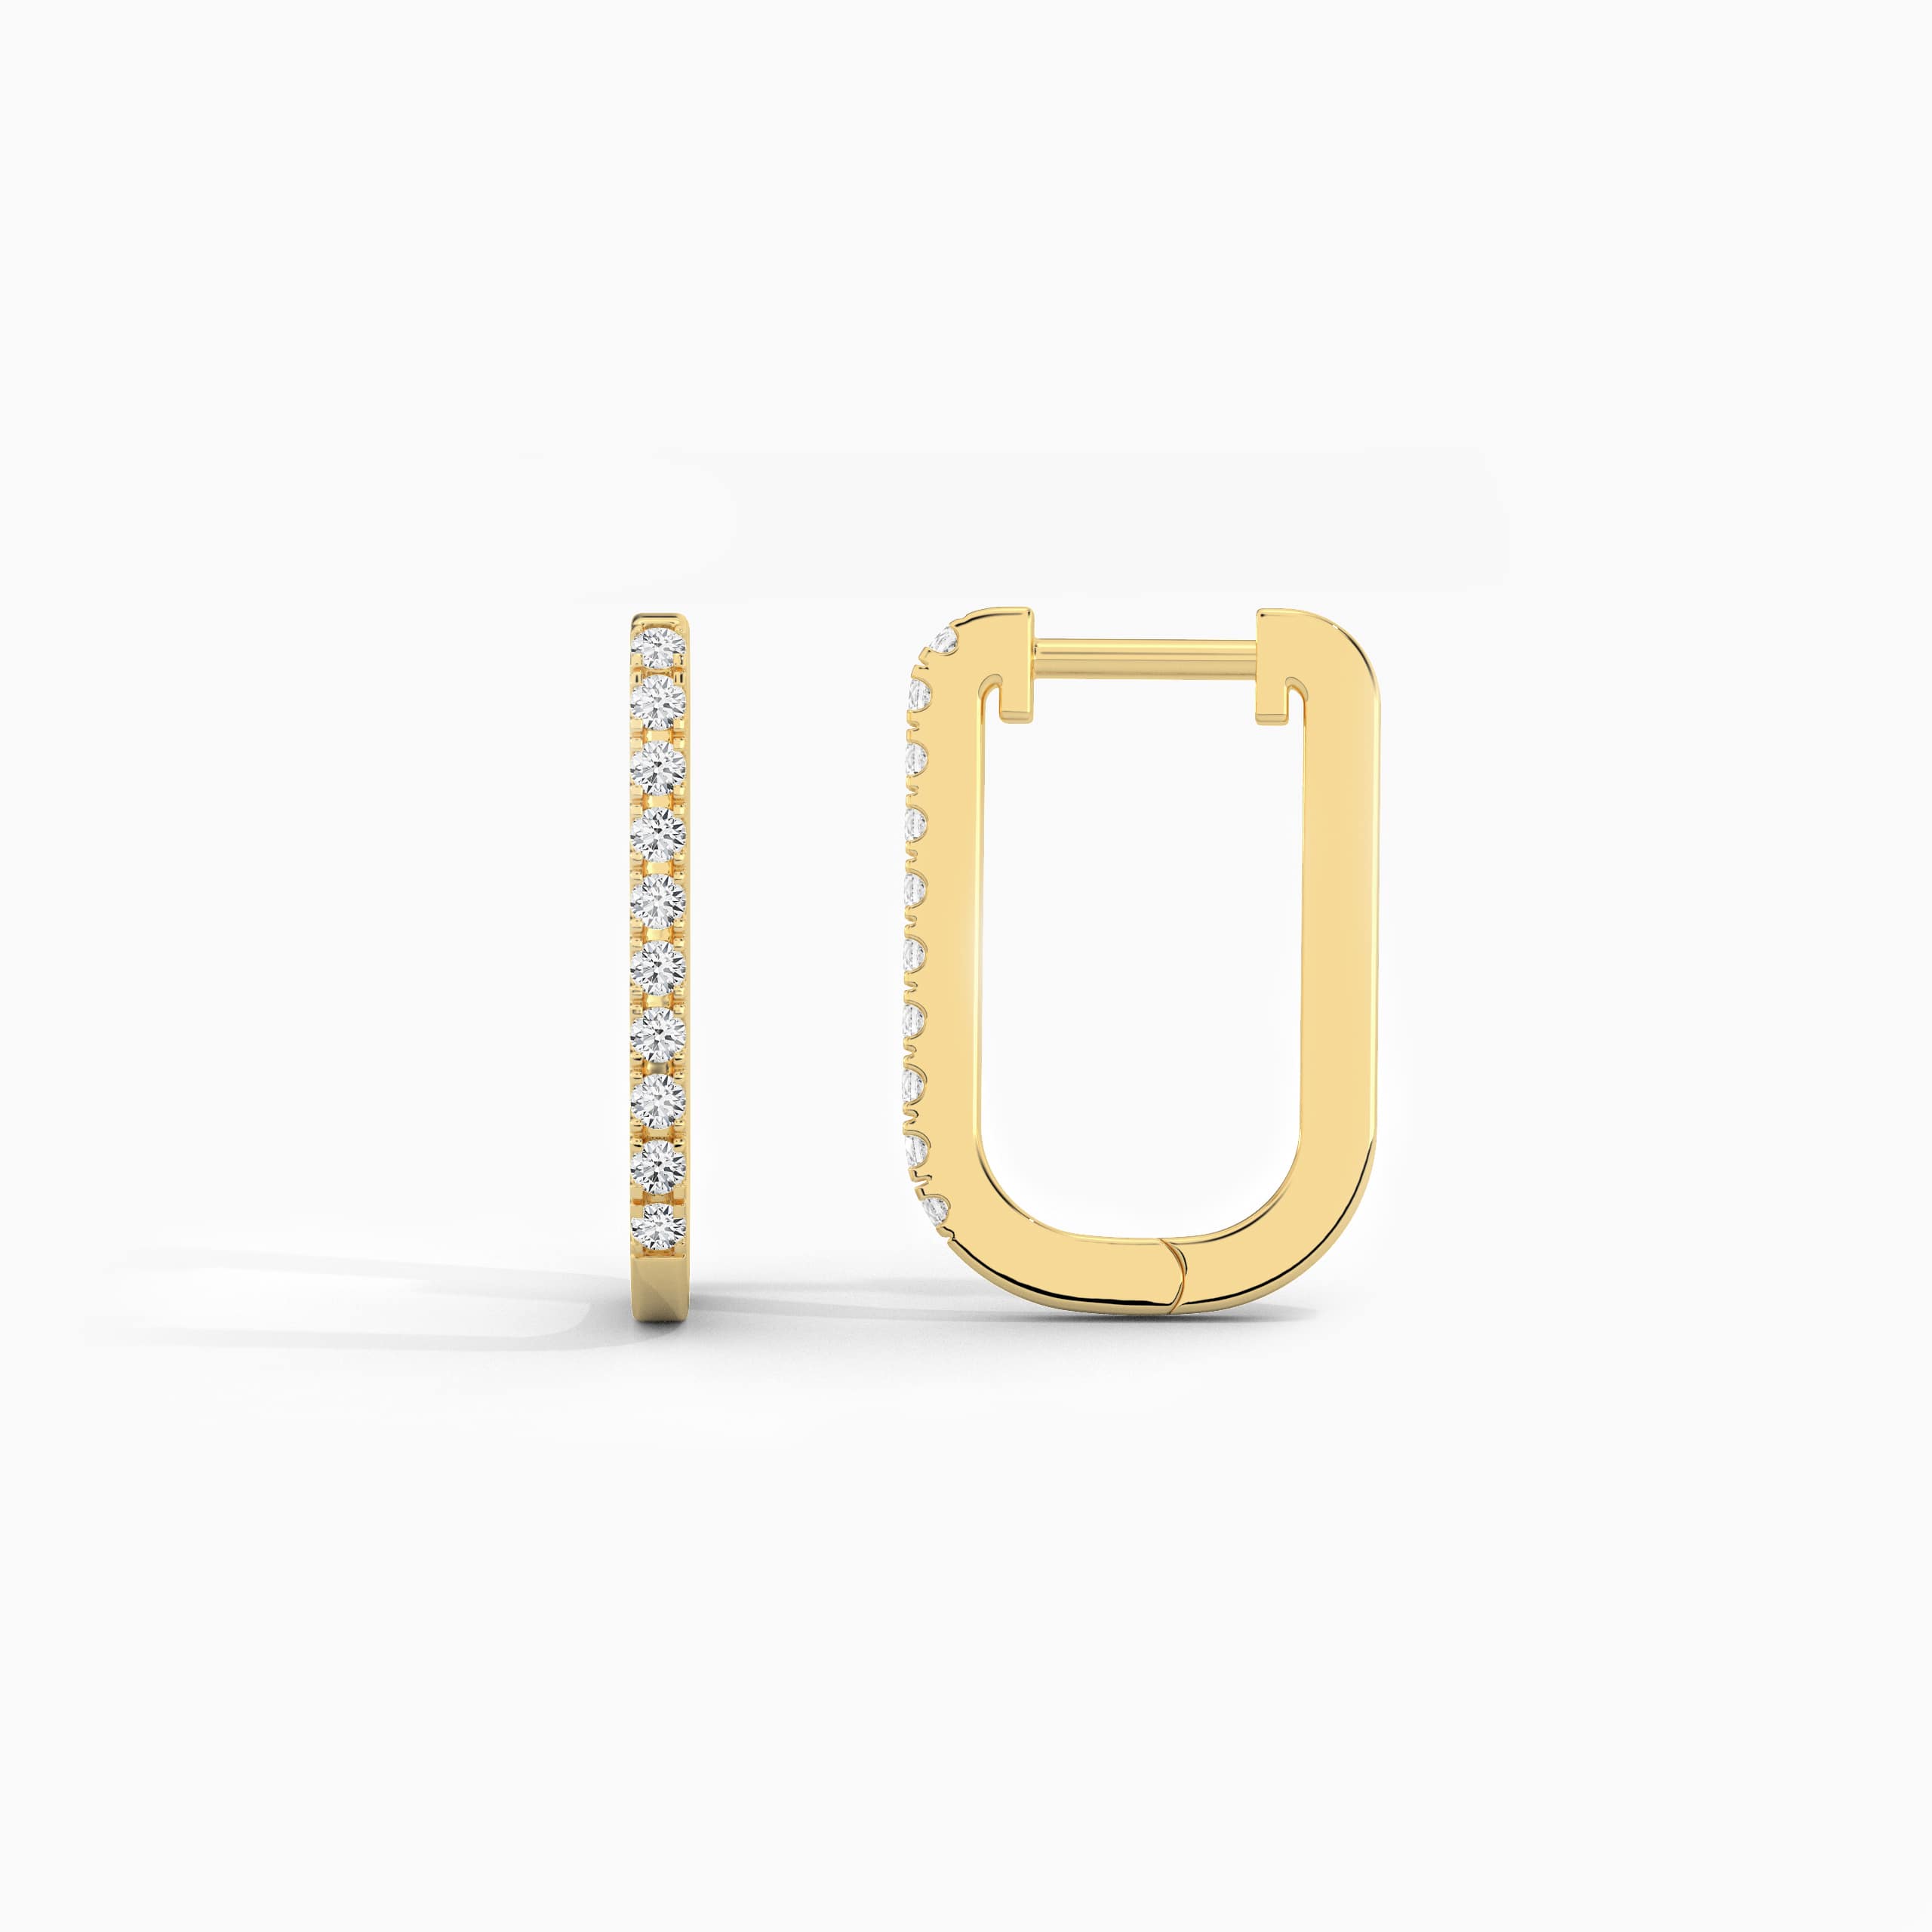 Yellow gold diamond paperclip earrings rendering image